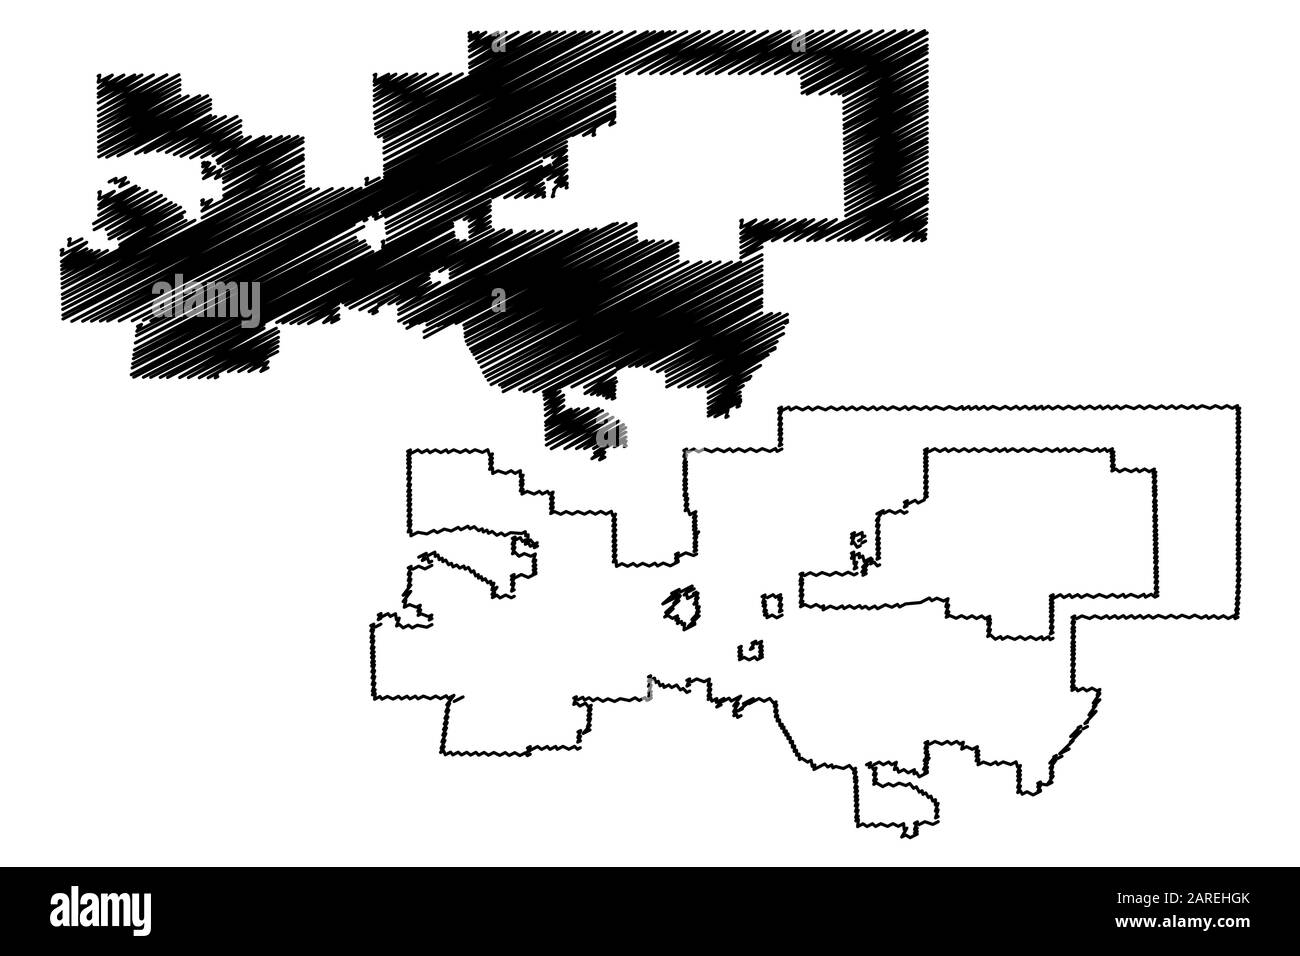 Palmdale City, California (United States cities, United States of America, usa city) map vector illustration, scribble sketch City of Palmdale map Stock Vector